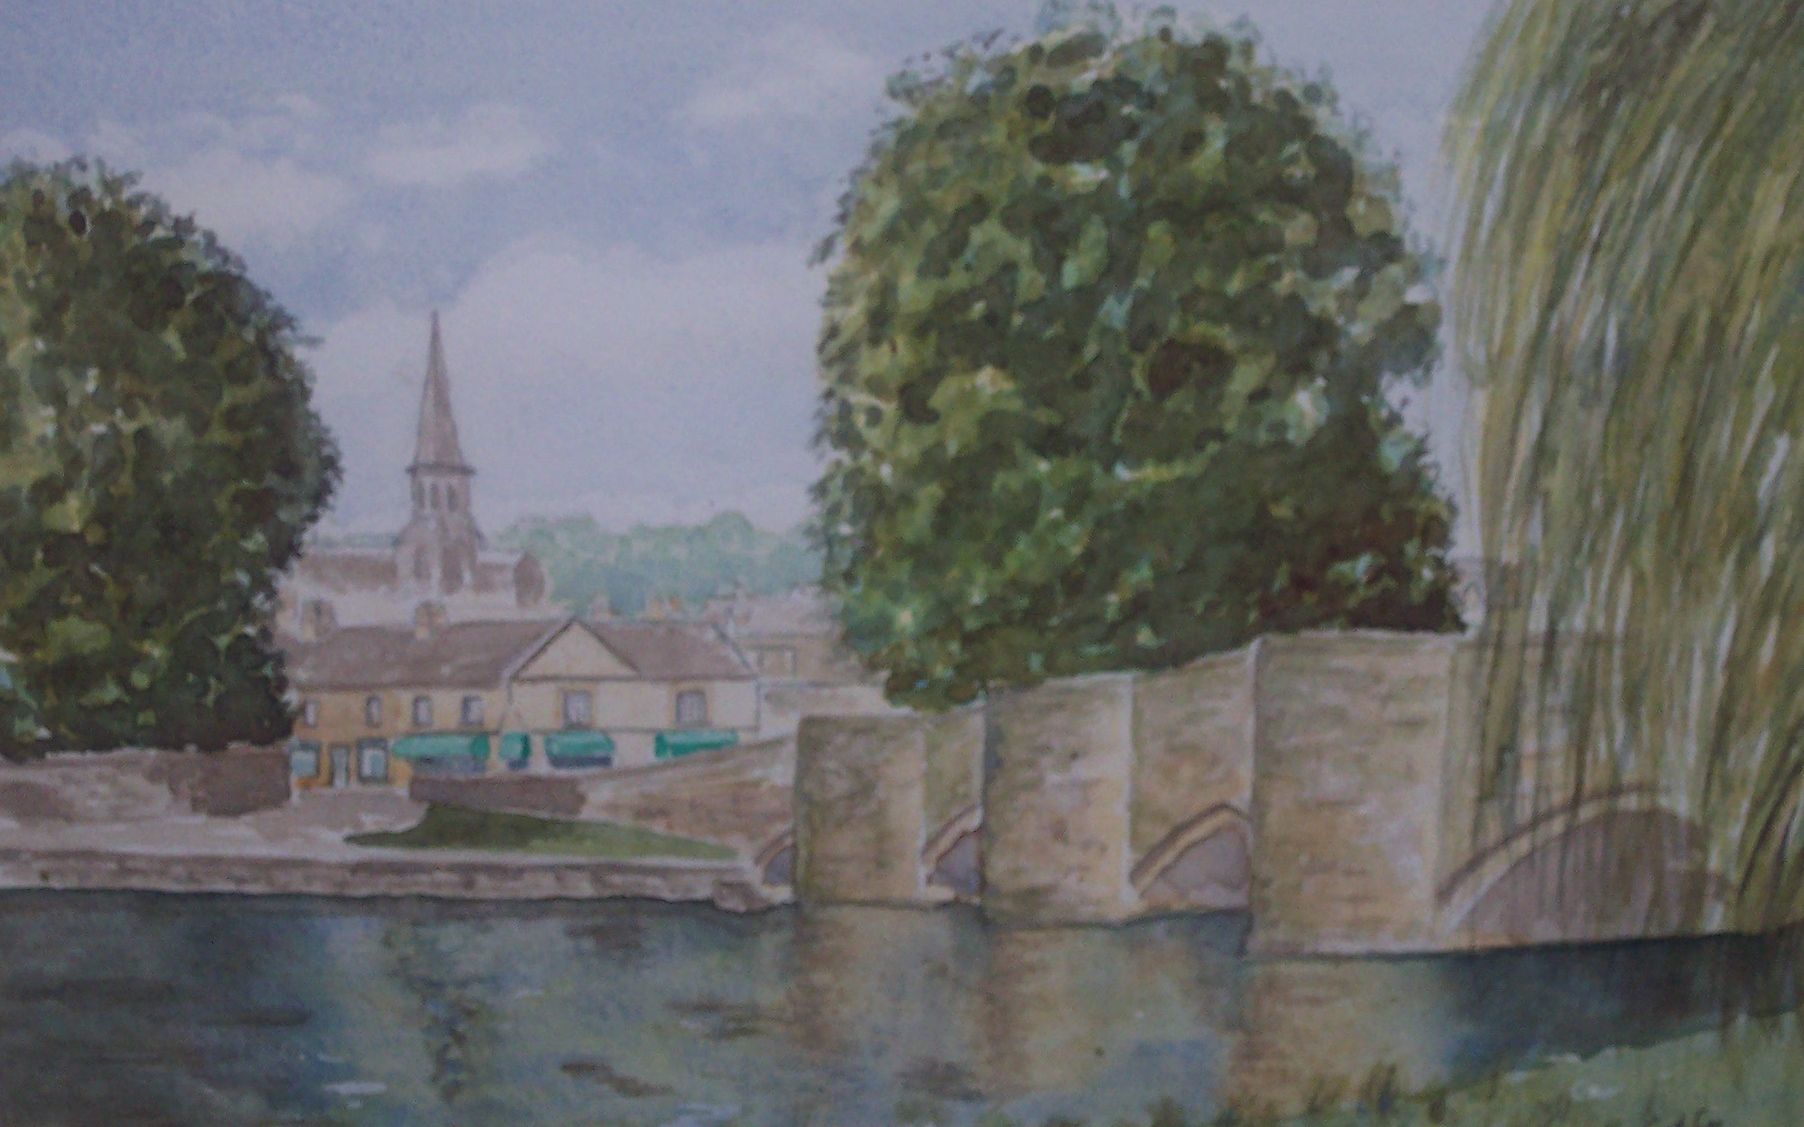 Watercolour  Framed - 22"x18"  Picture size - 13"x9"  Price - £70